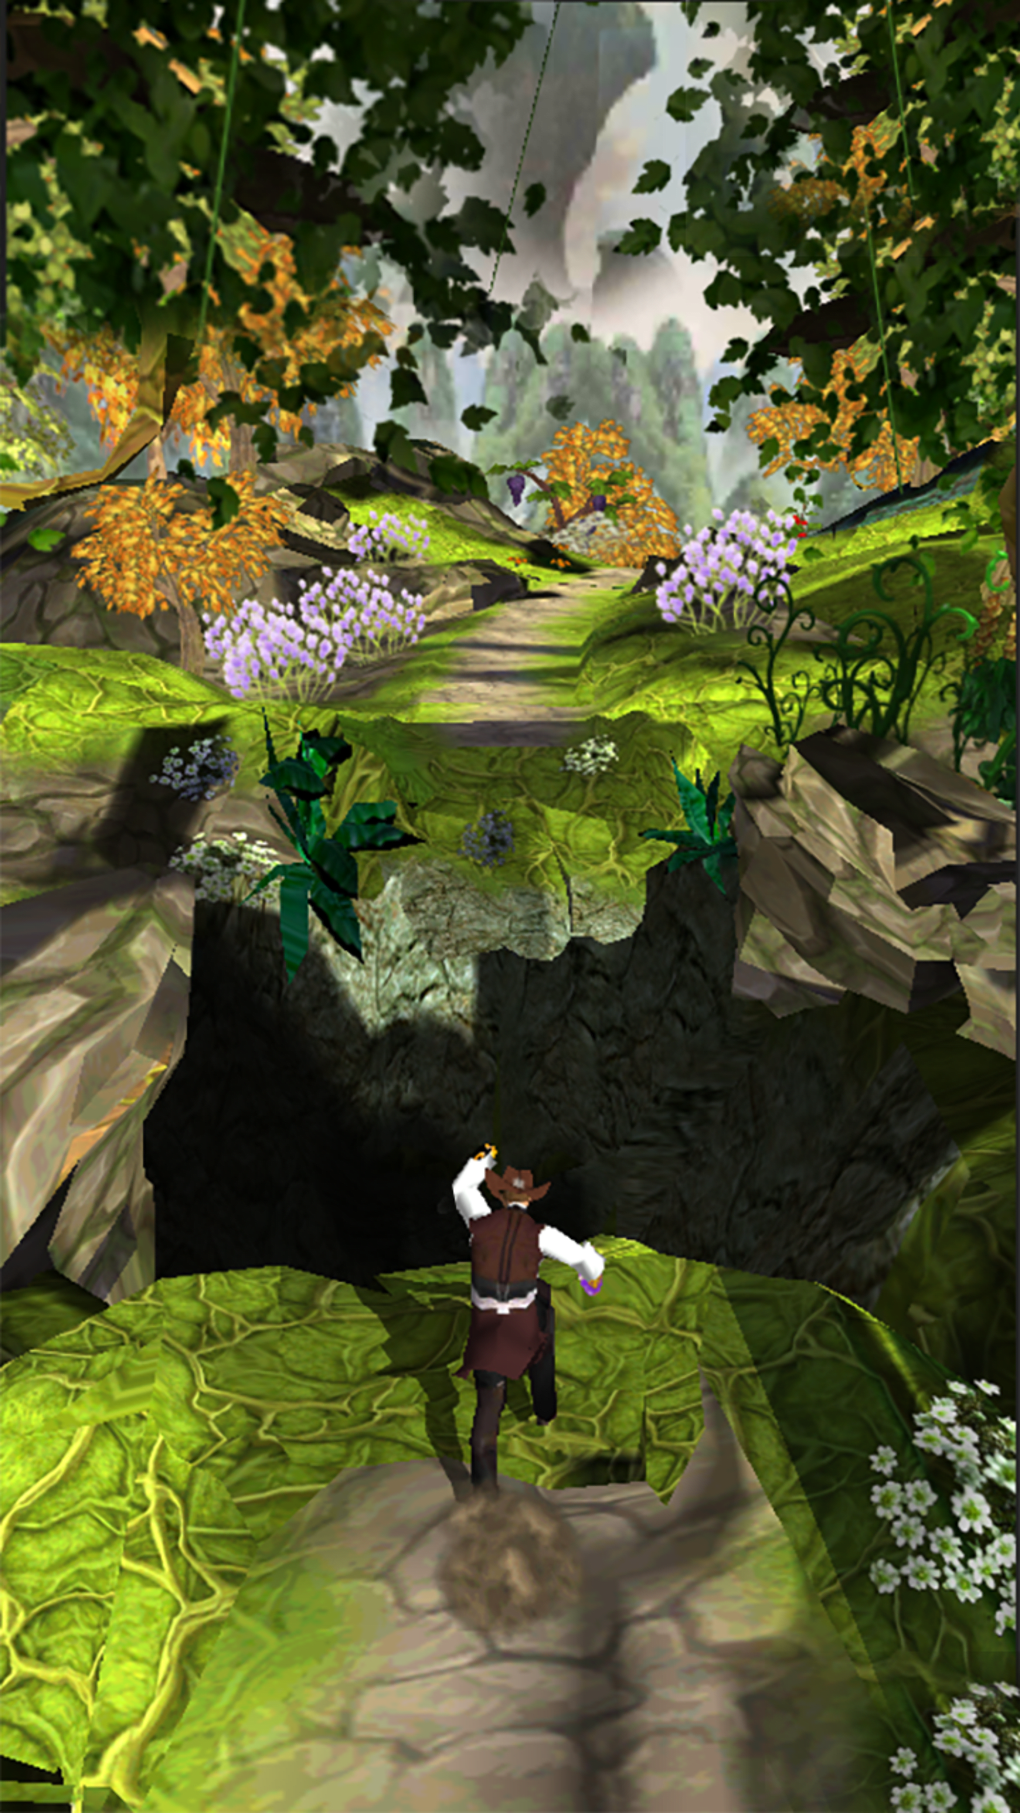 Temple King Runner Lost Oz APK for Android - Download